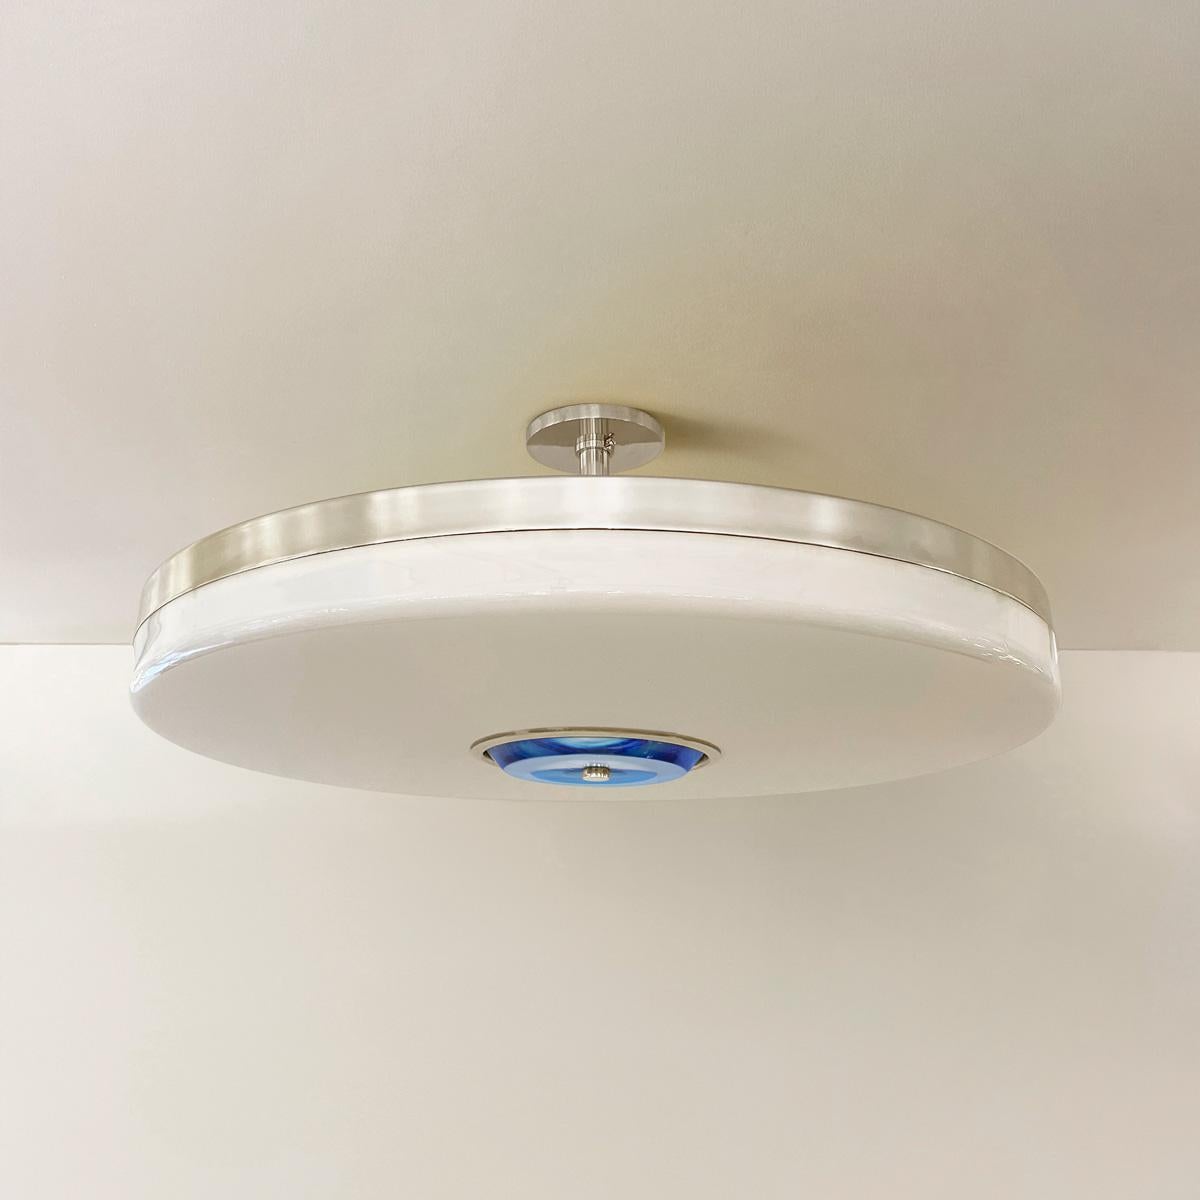 The Iris ceiling light is designed around an expansive acrylic shade with a hand carved glass center. This versatile fixture can be installed as a pendant on a stem or as a true flush mount. The first images show the fixture in our polished nickel